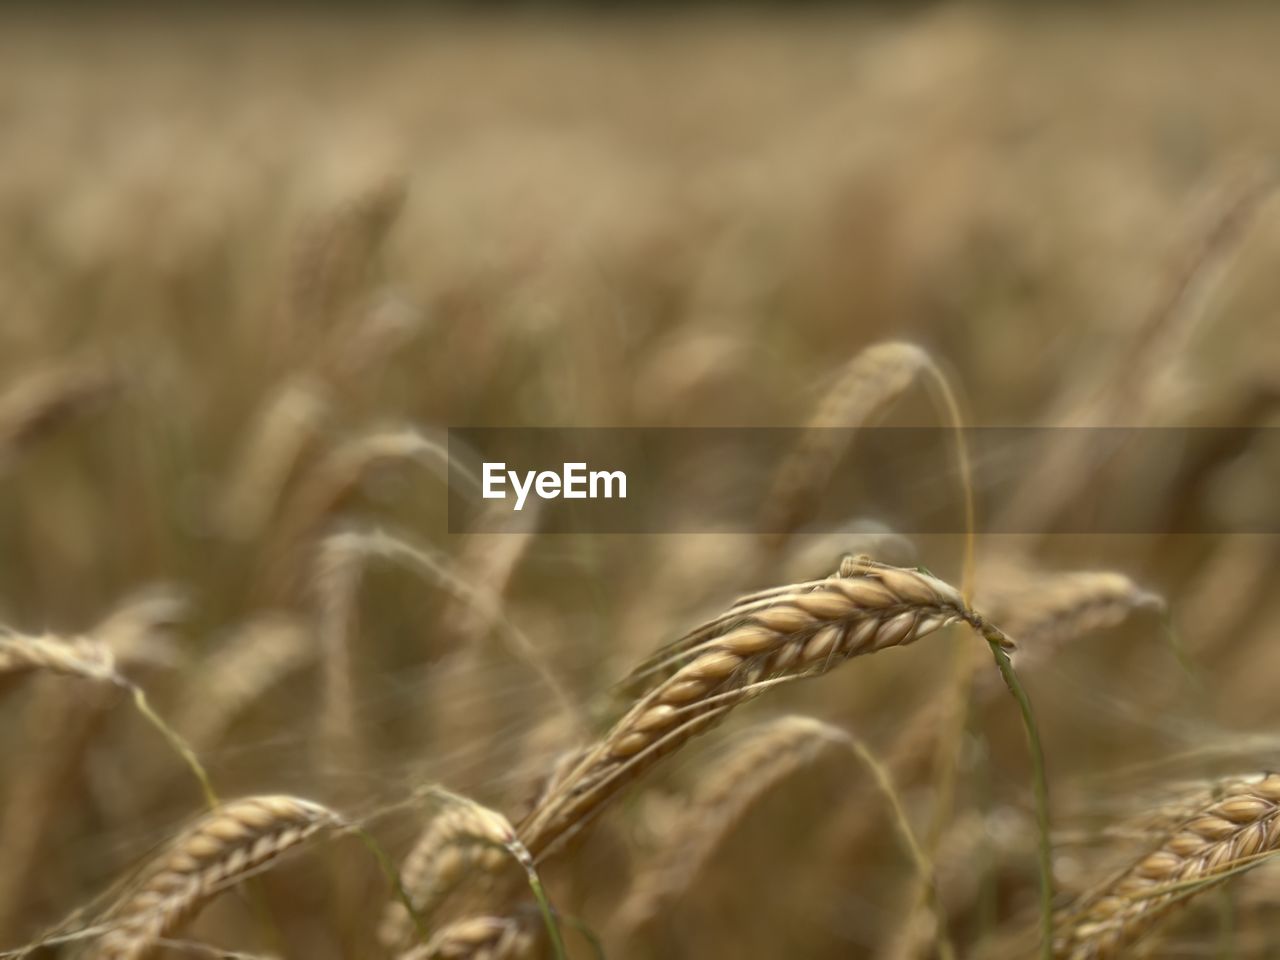 cereal plant, crop, agriculture, food, plant, rural scene, wheat, landscape, field, food grain, growth, farm, land, nature, barley, rye, close-up, einkorn wheat, food and drink, whole grain, emmer, no people, grass, summer, environment, cereal, beauty in nature, focus on foreground, selective focus, harvesting, corn, gold, ripe, outdoors, cultivated, plant stem, backgrounds, seed, organic, triticale, prairie, day, hordeum, tranquility, copy space, scenics - nature, vegetable